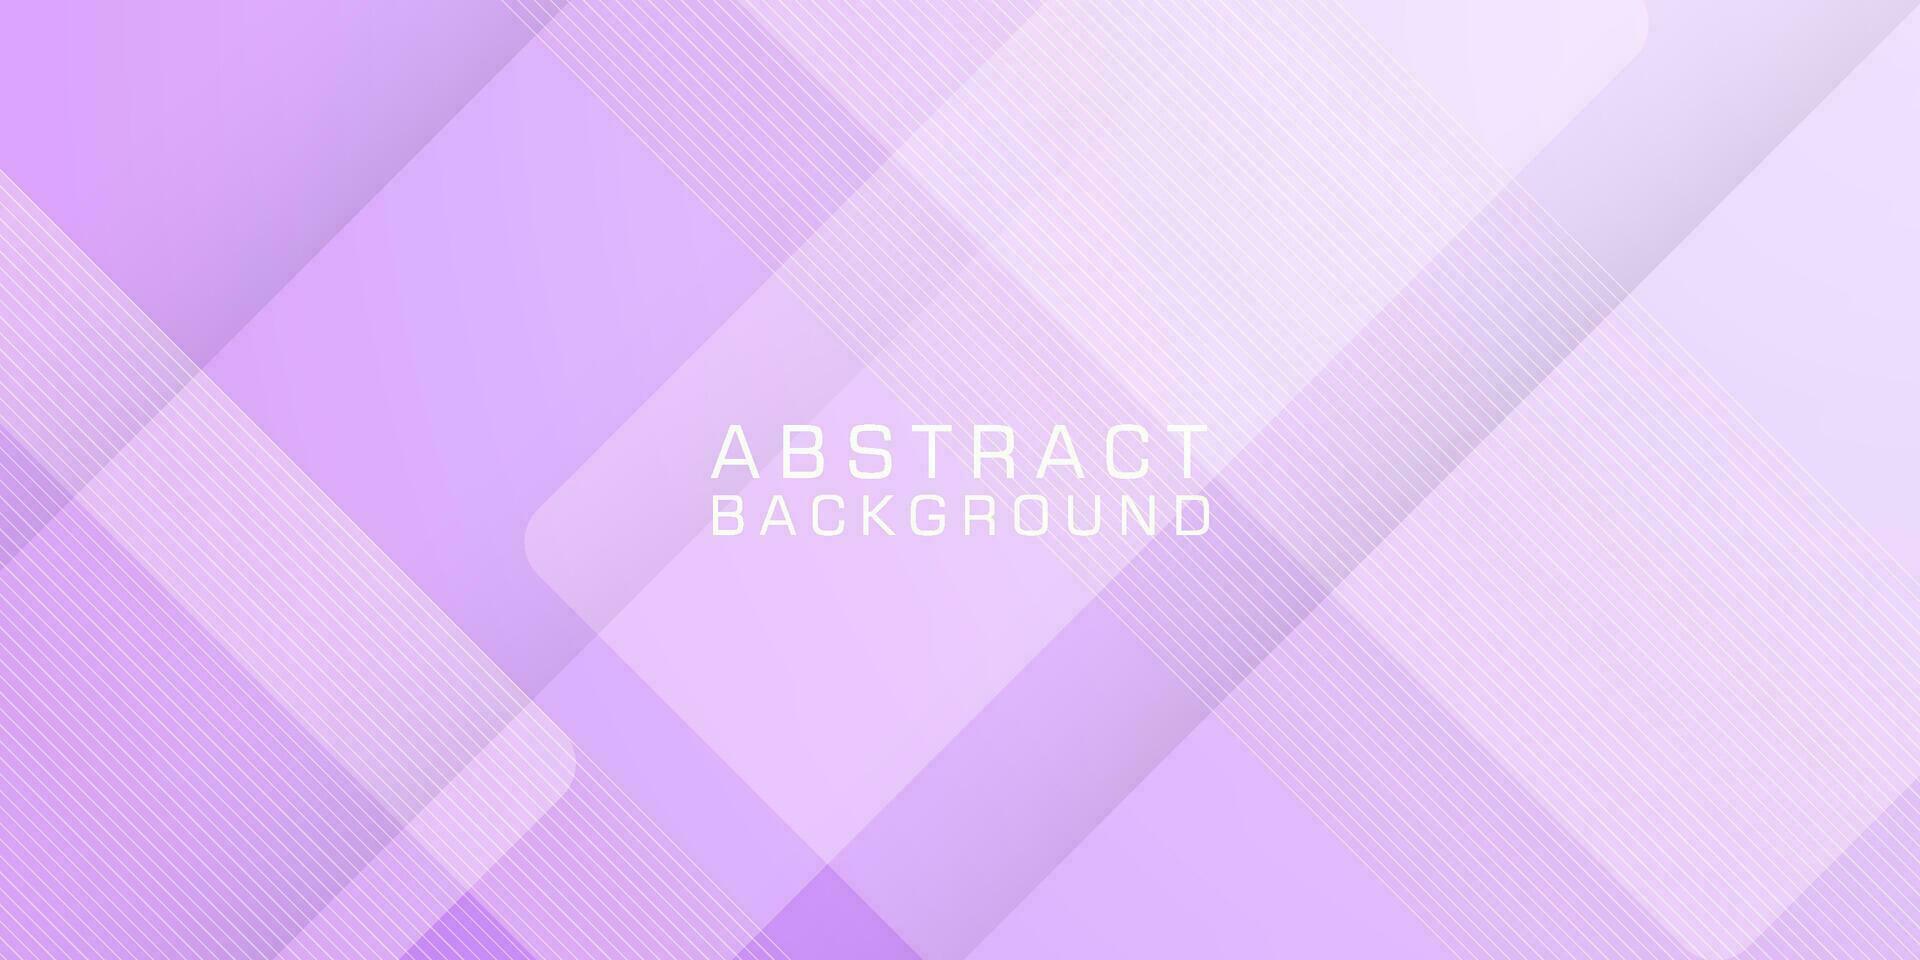 Geometric abstract  purple background with square white overlay background. Shadow combination diagonal background. Eps10 vector